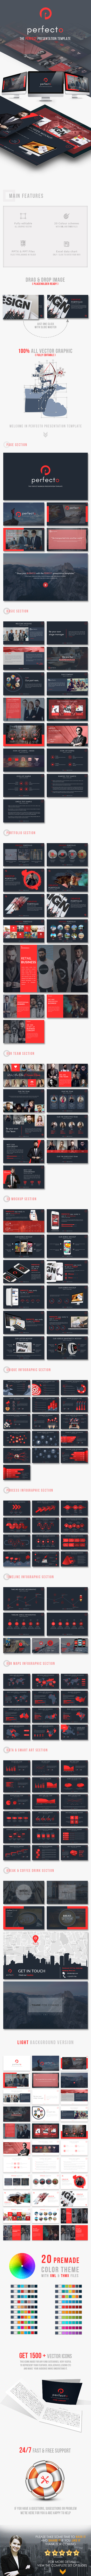 Perfecto Presentation Template with Modern Concept